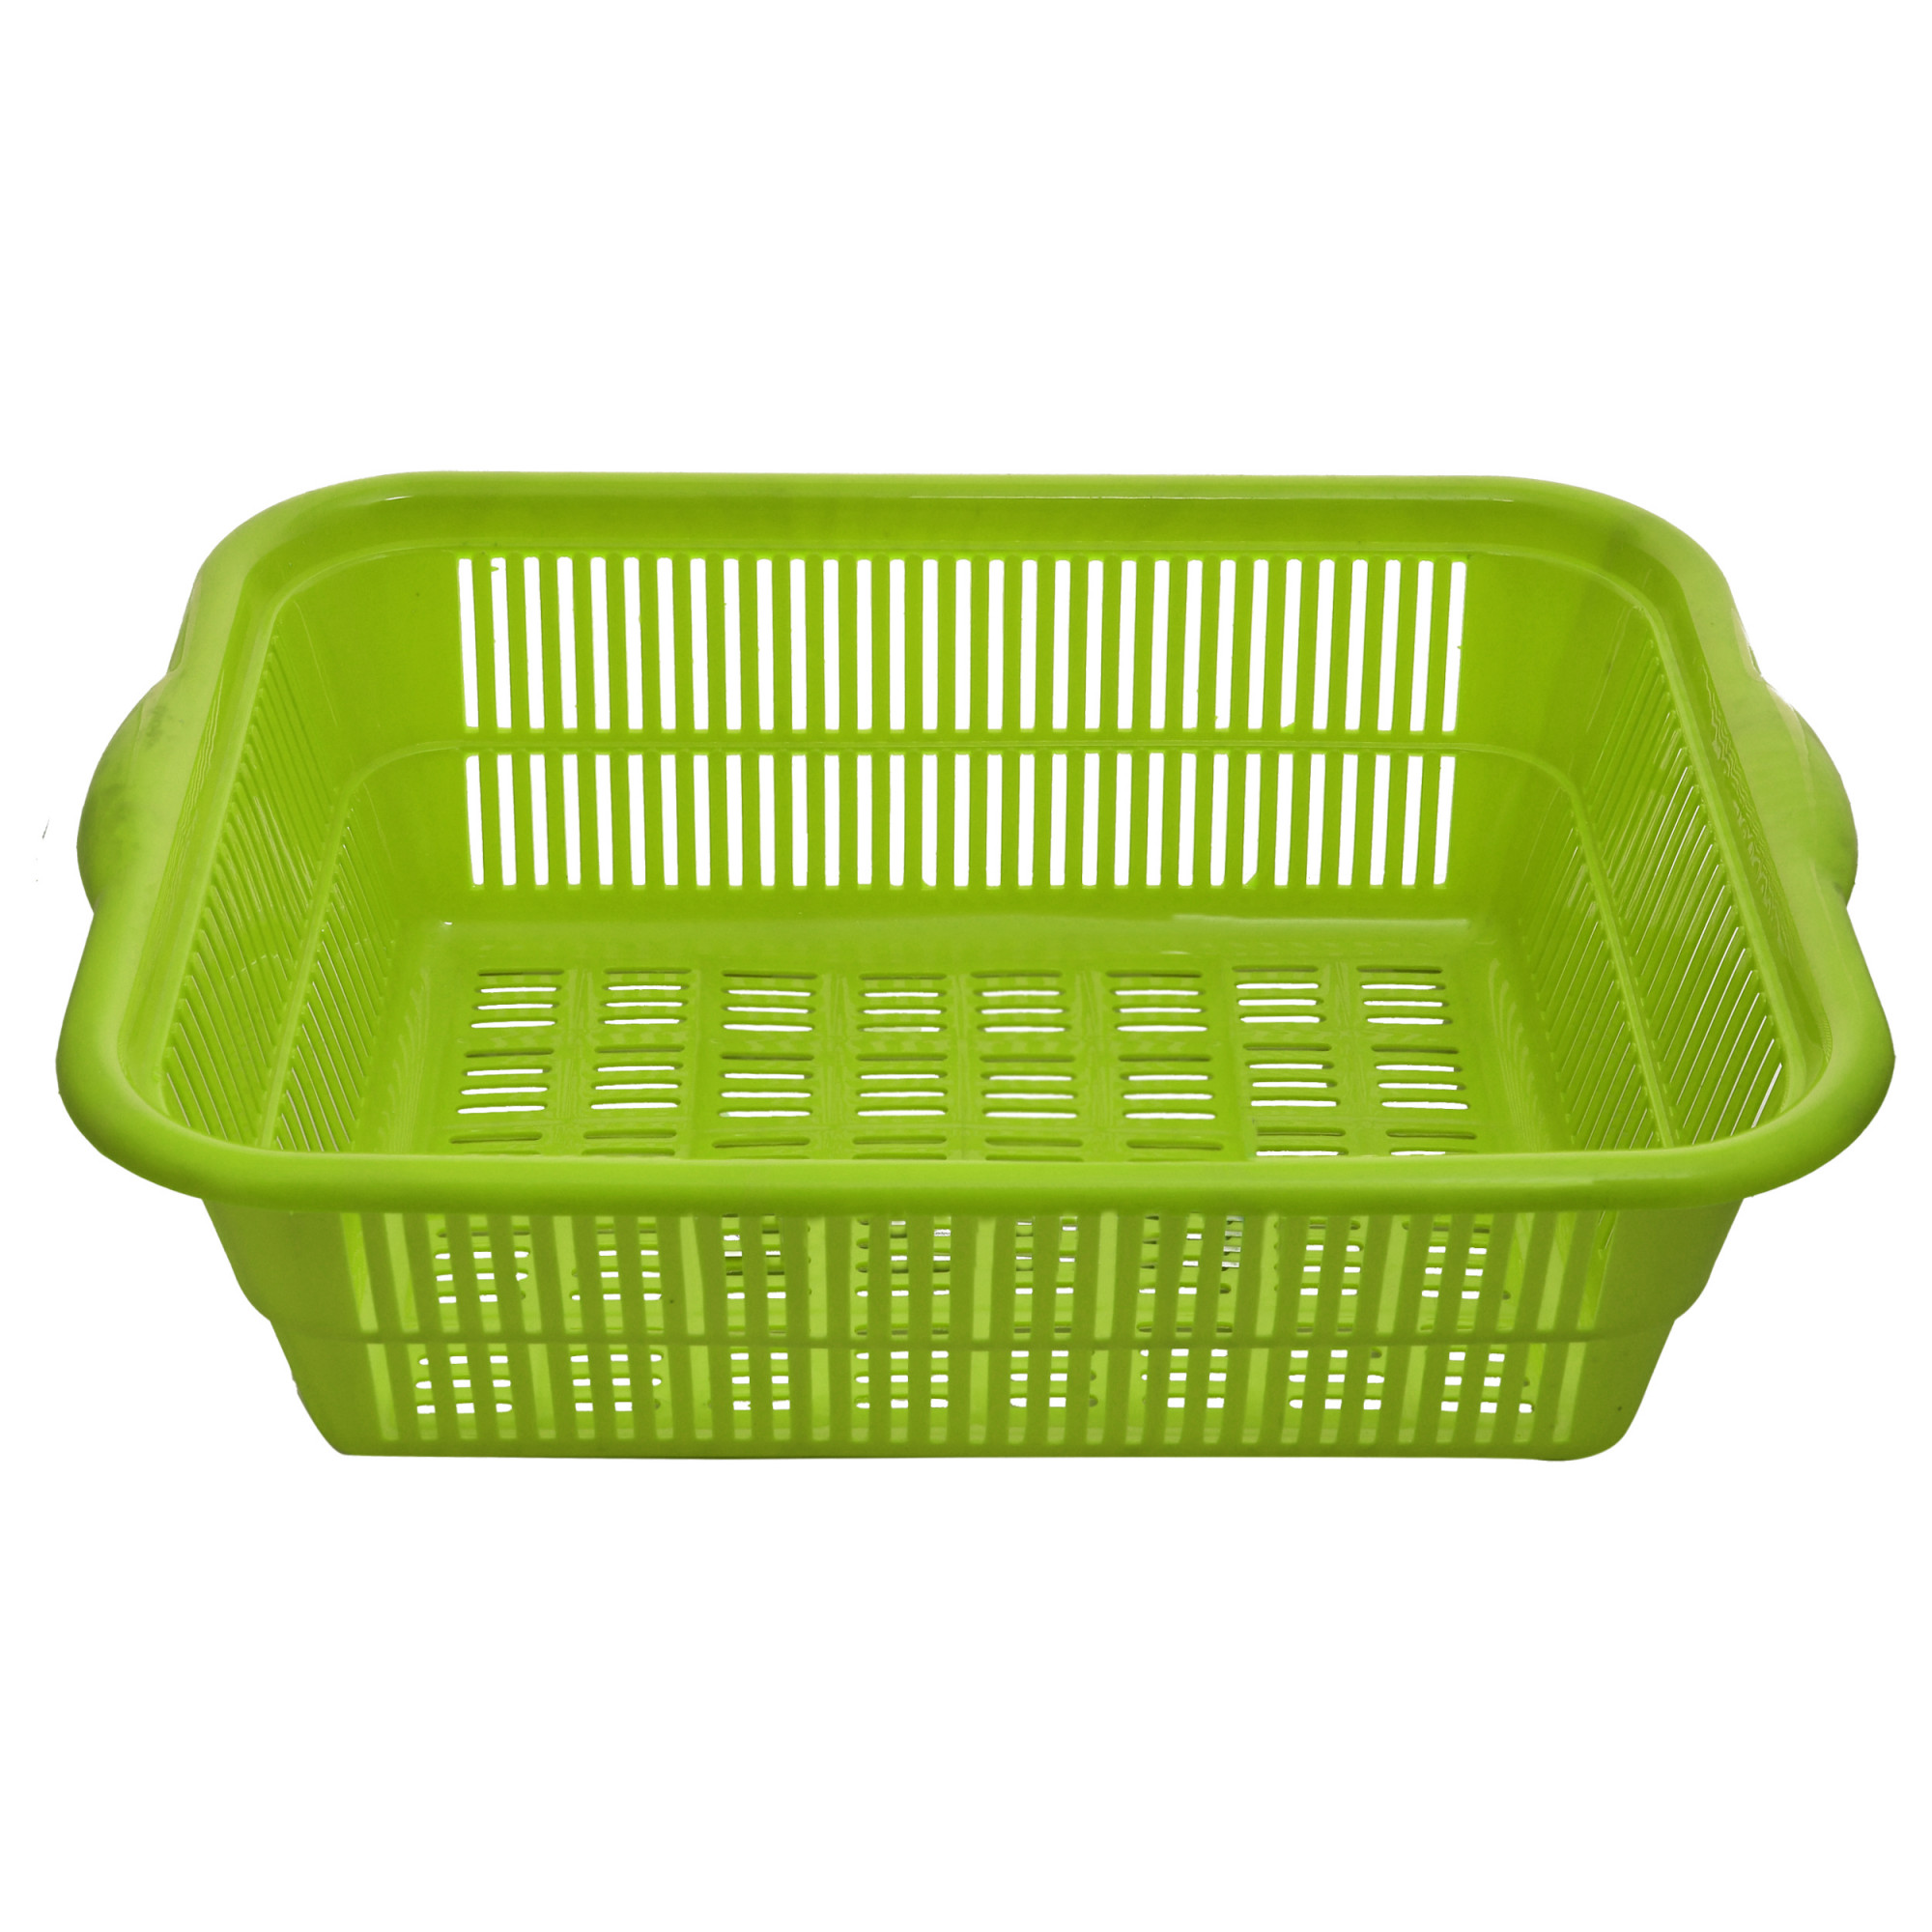 Kuber Industries 4 Pieces Plastic Kitchen Dish Rack Drainer Vegetables And Fruits Basket Dish Rack Multipurpose Organizers ,Small Size,Green